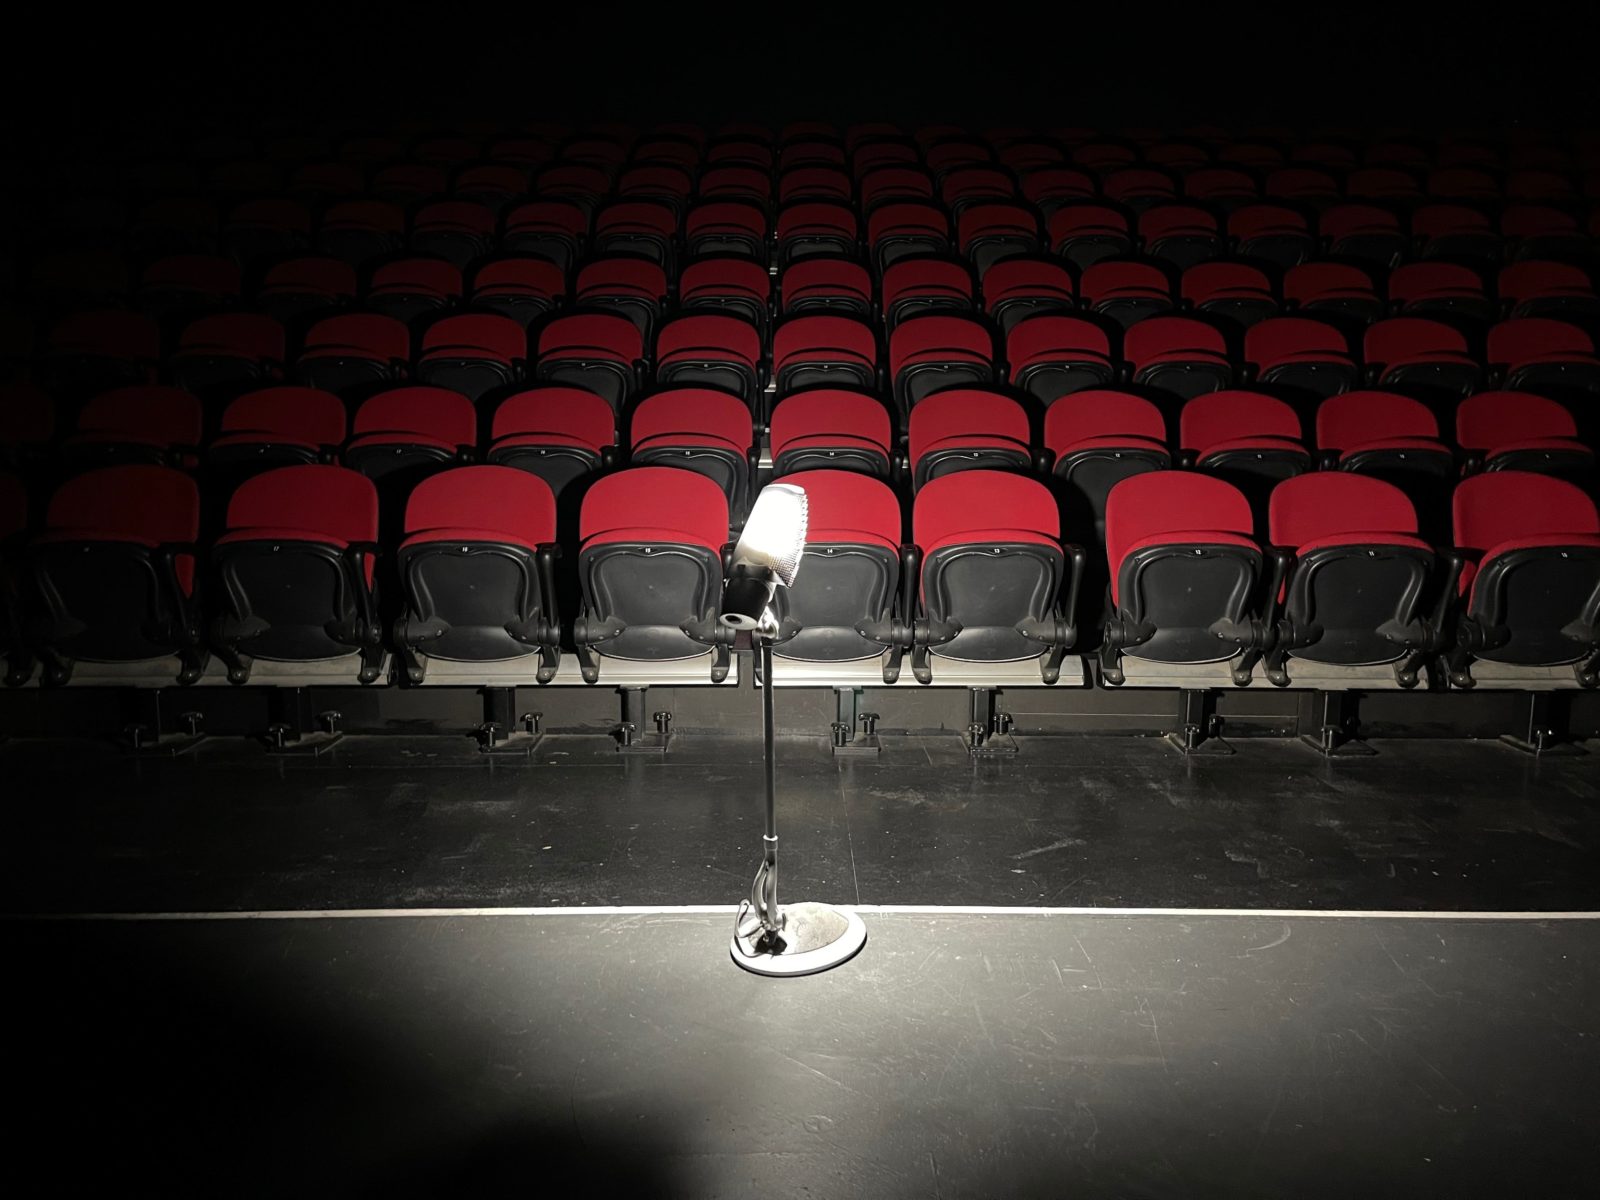 dimly lit image of light on a stand with red theatre seating in background